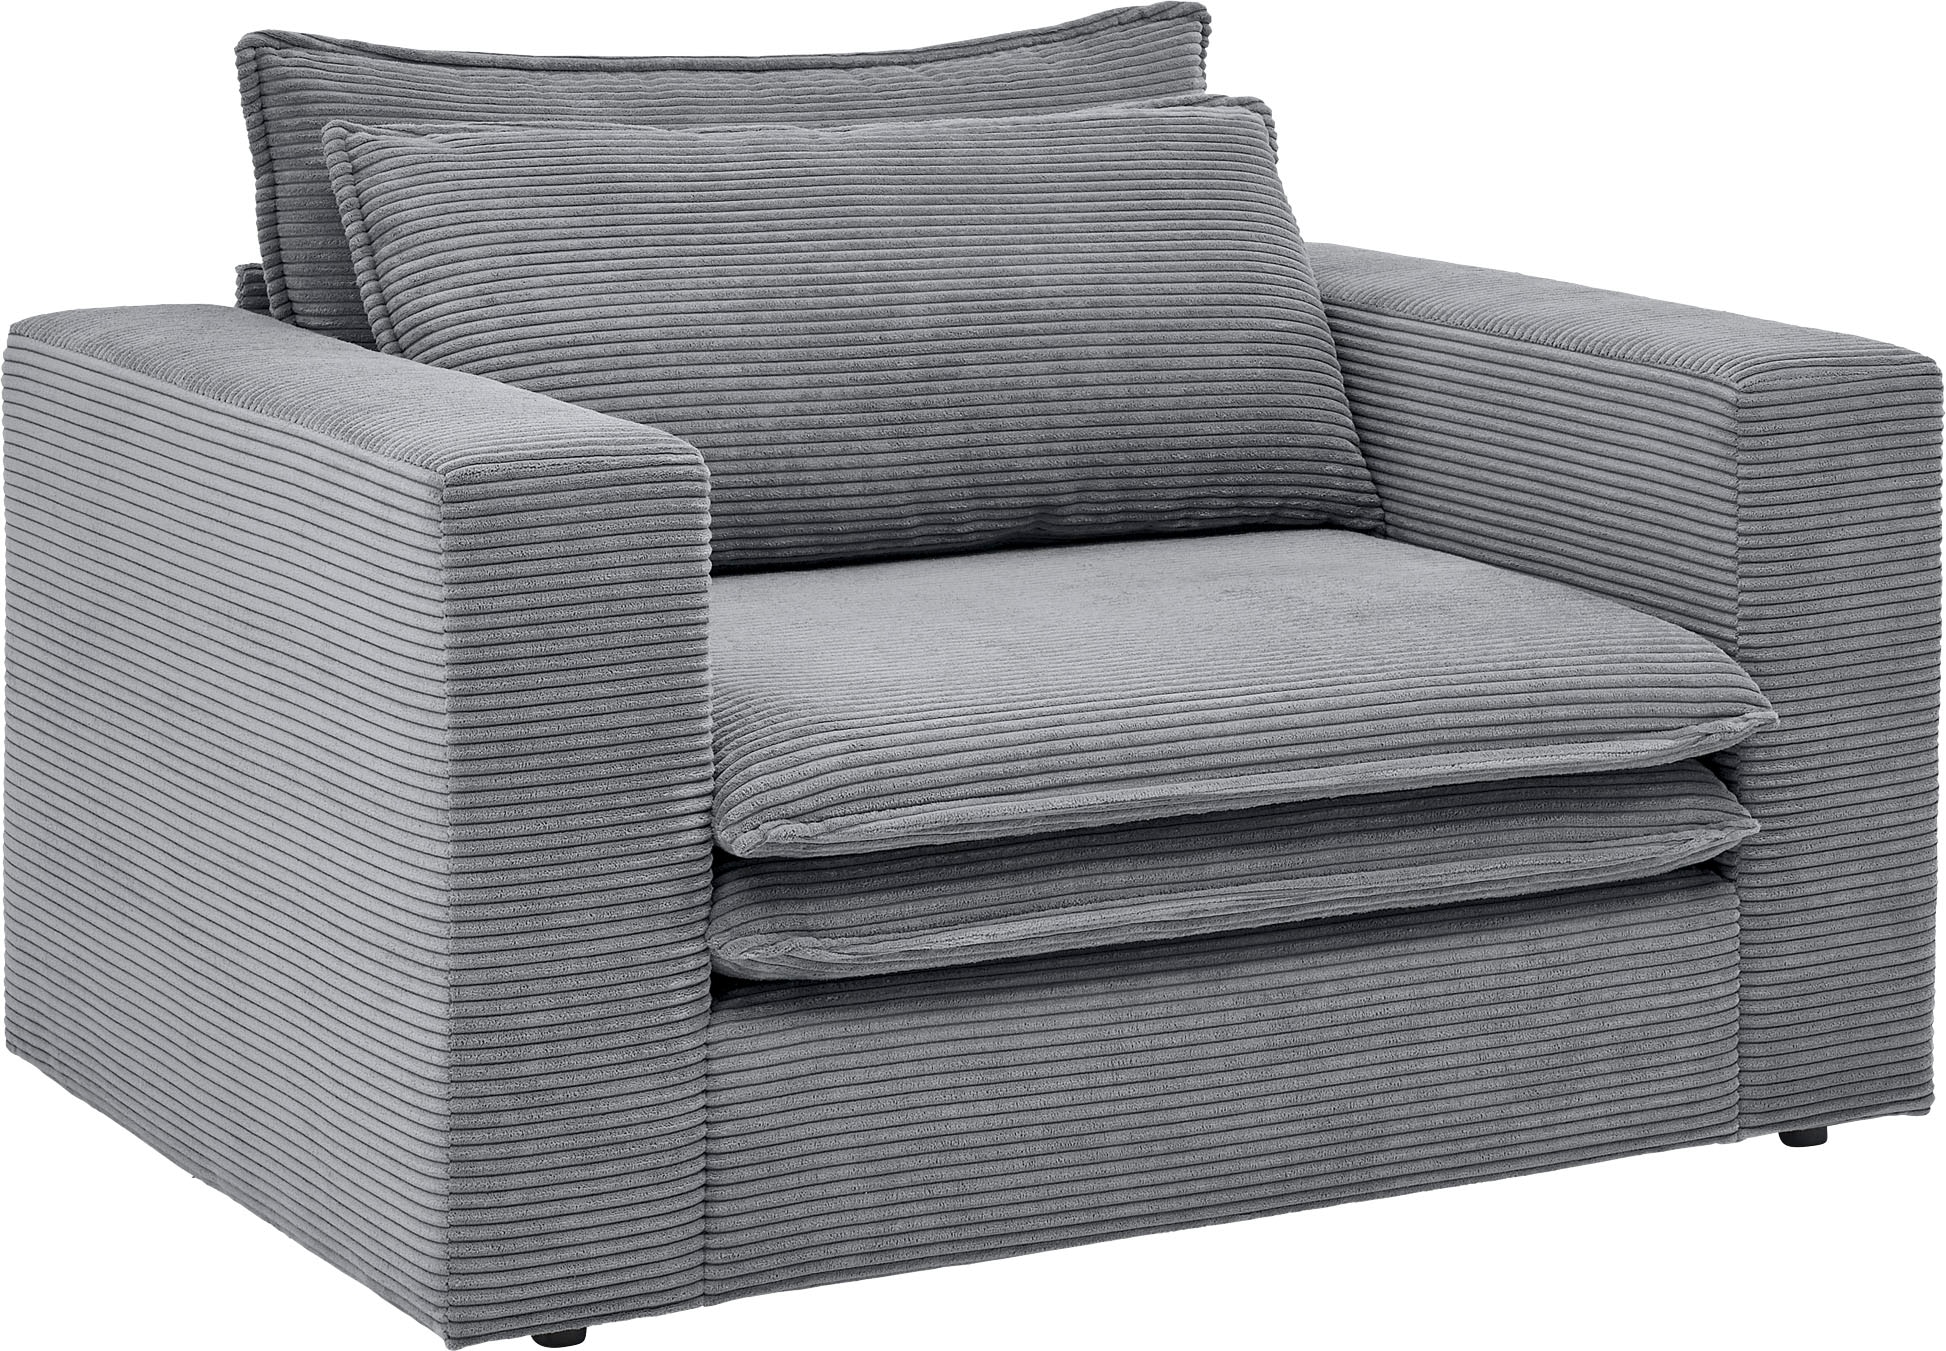 Places of Style bei Cord, Loveseat OTTO trendiger Loveseat »PIAGGE«, Hochwertiger